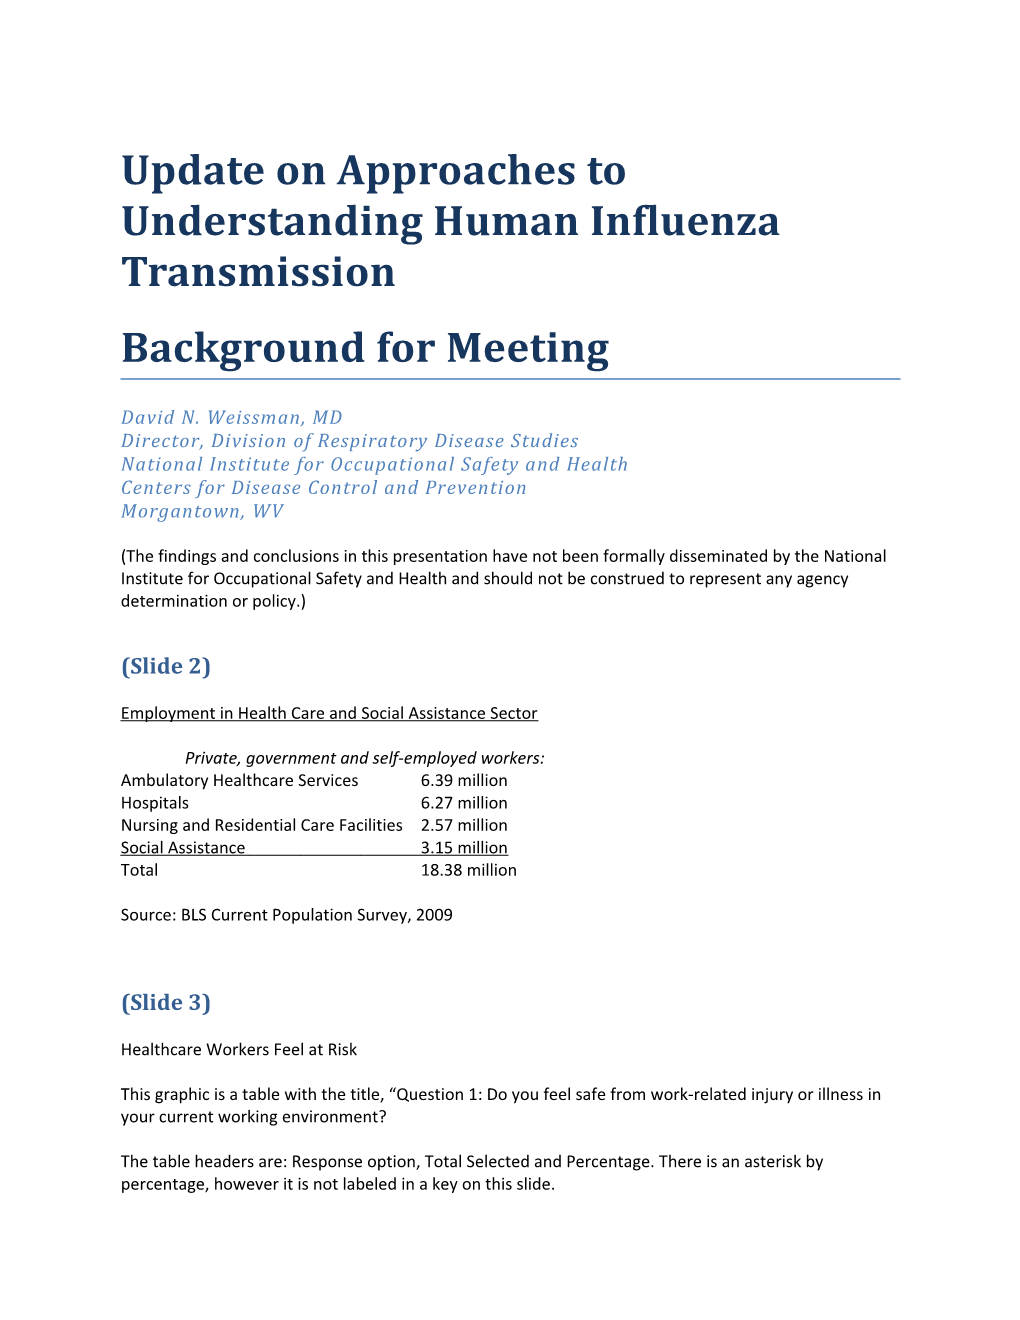 Update on Approaches to Understanding Human Influenza Transmission